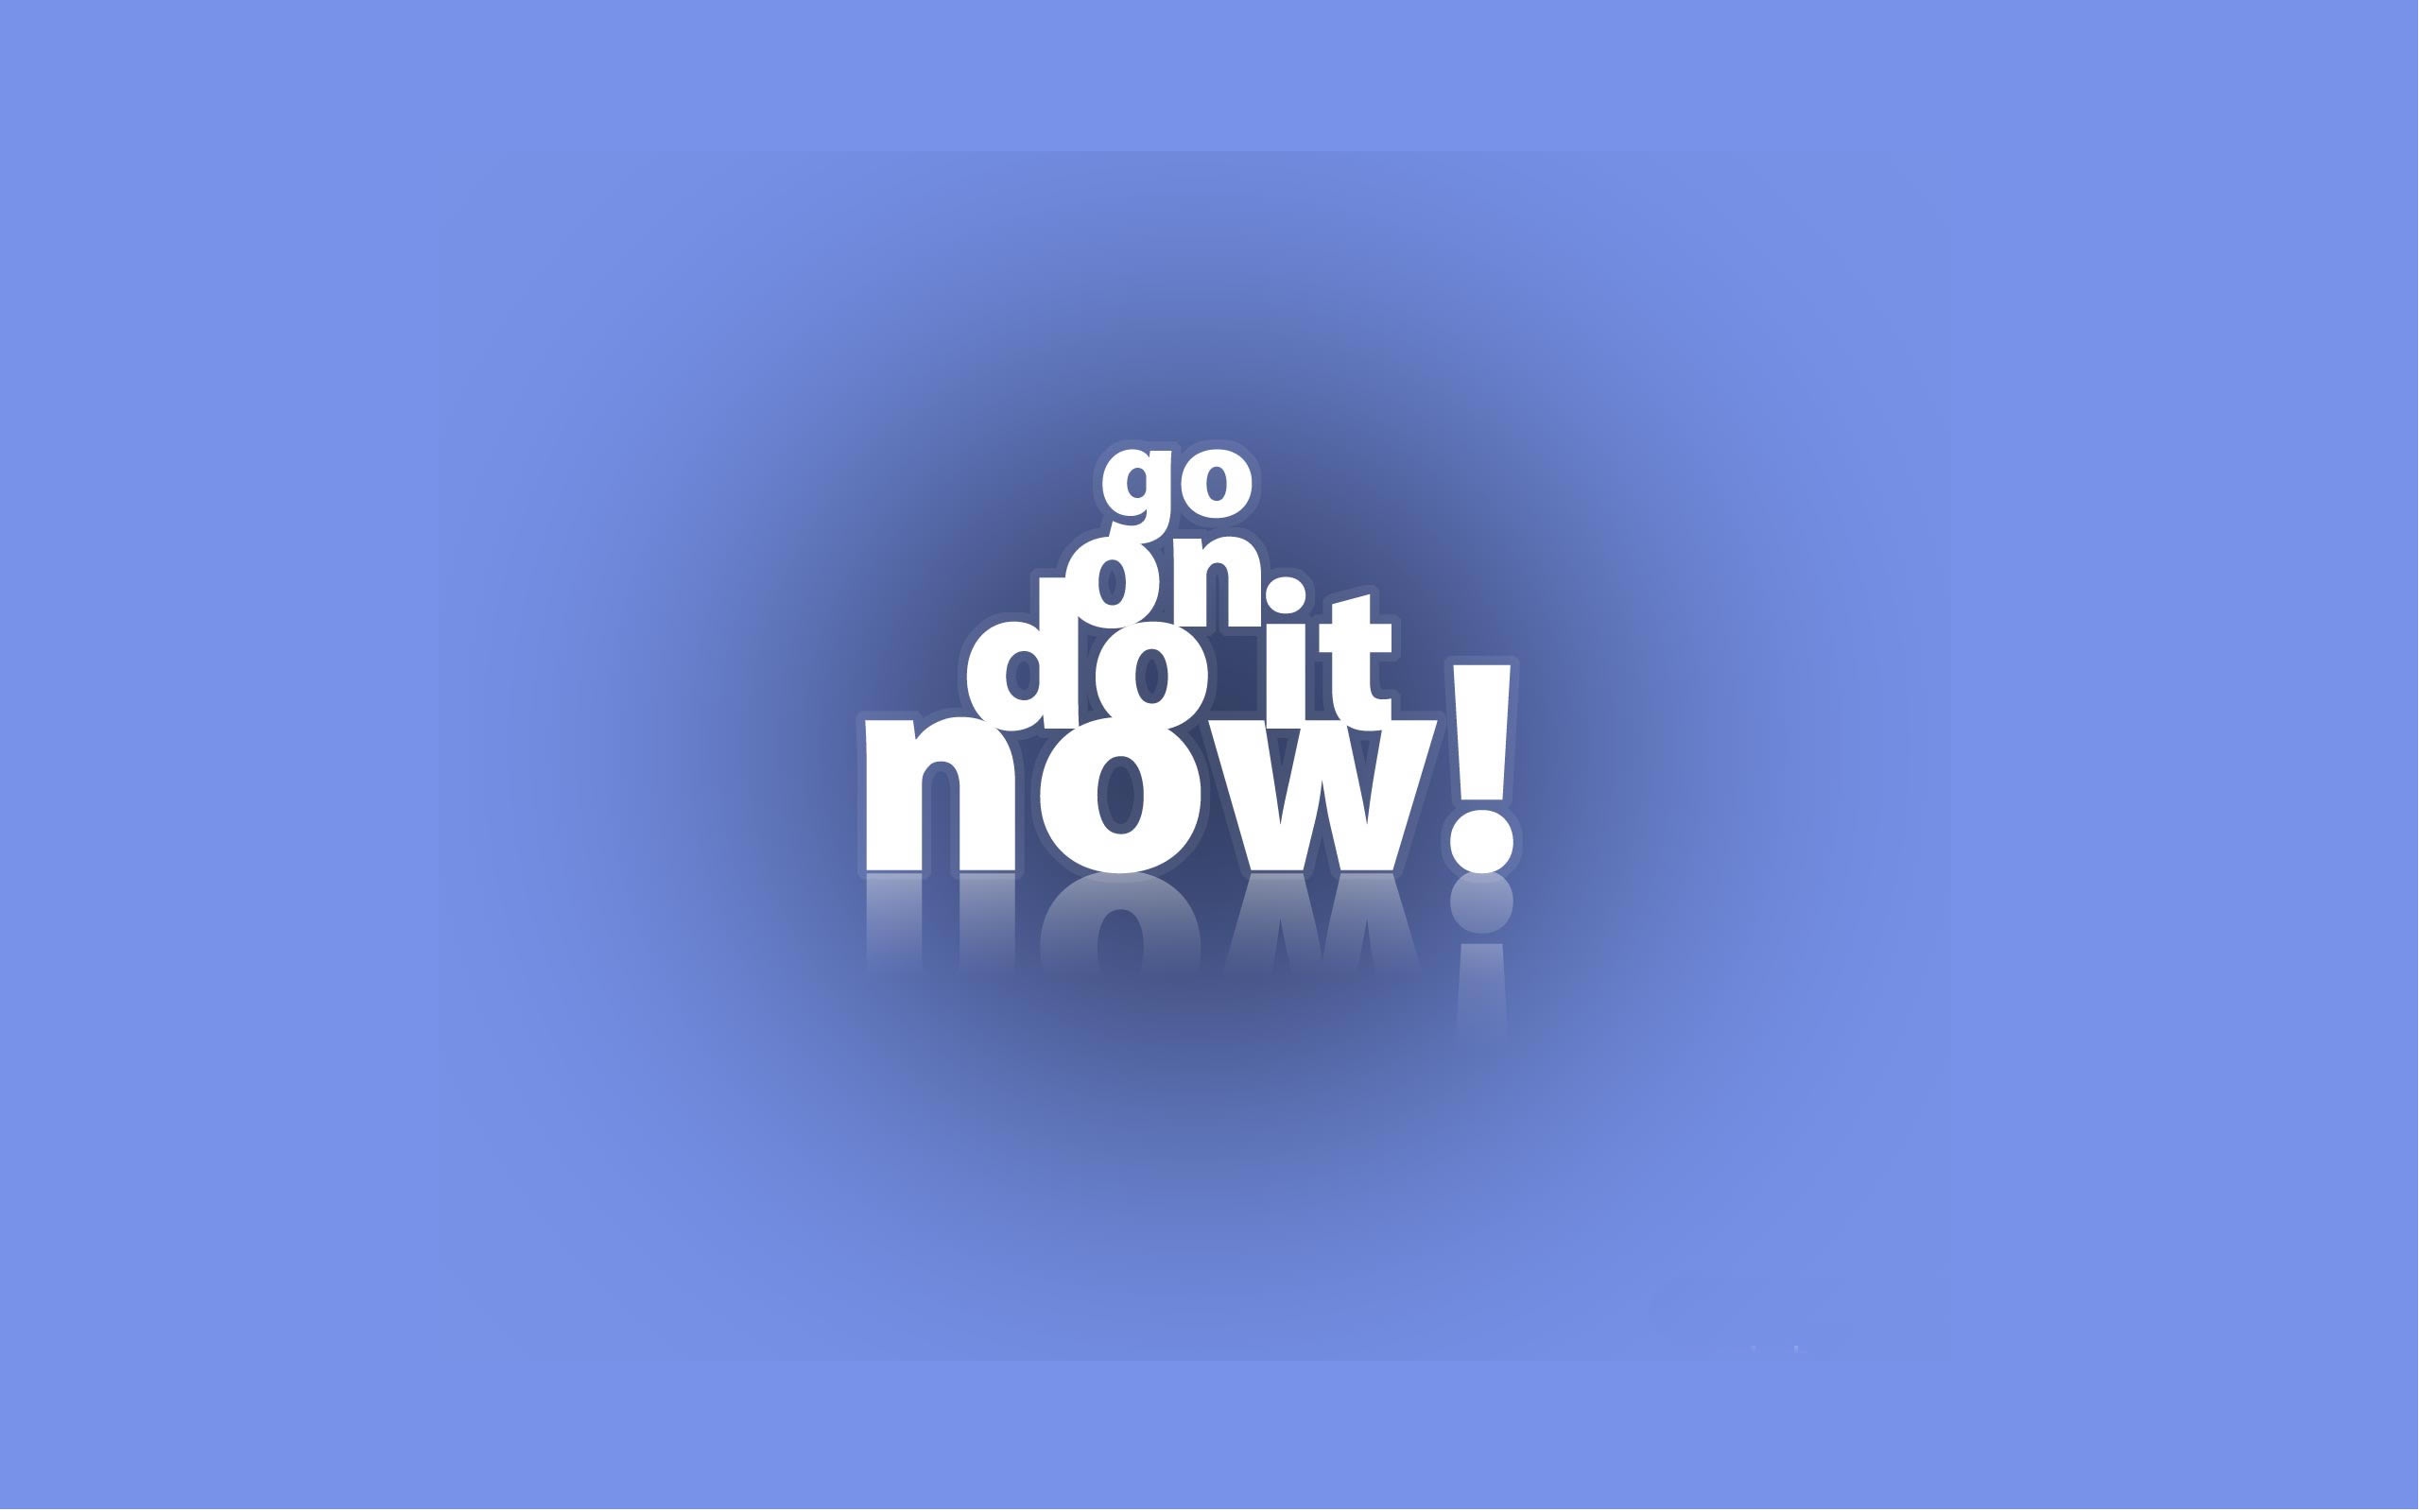 Do It Now Cliparts, Stock Vector and Royalty Free Do It Now Illustrations